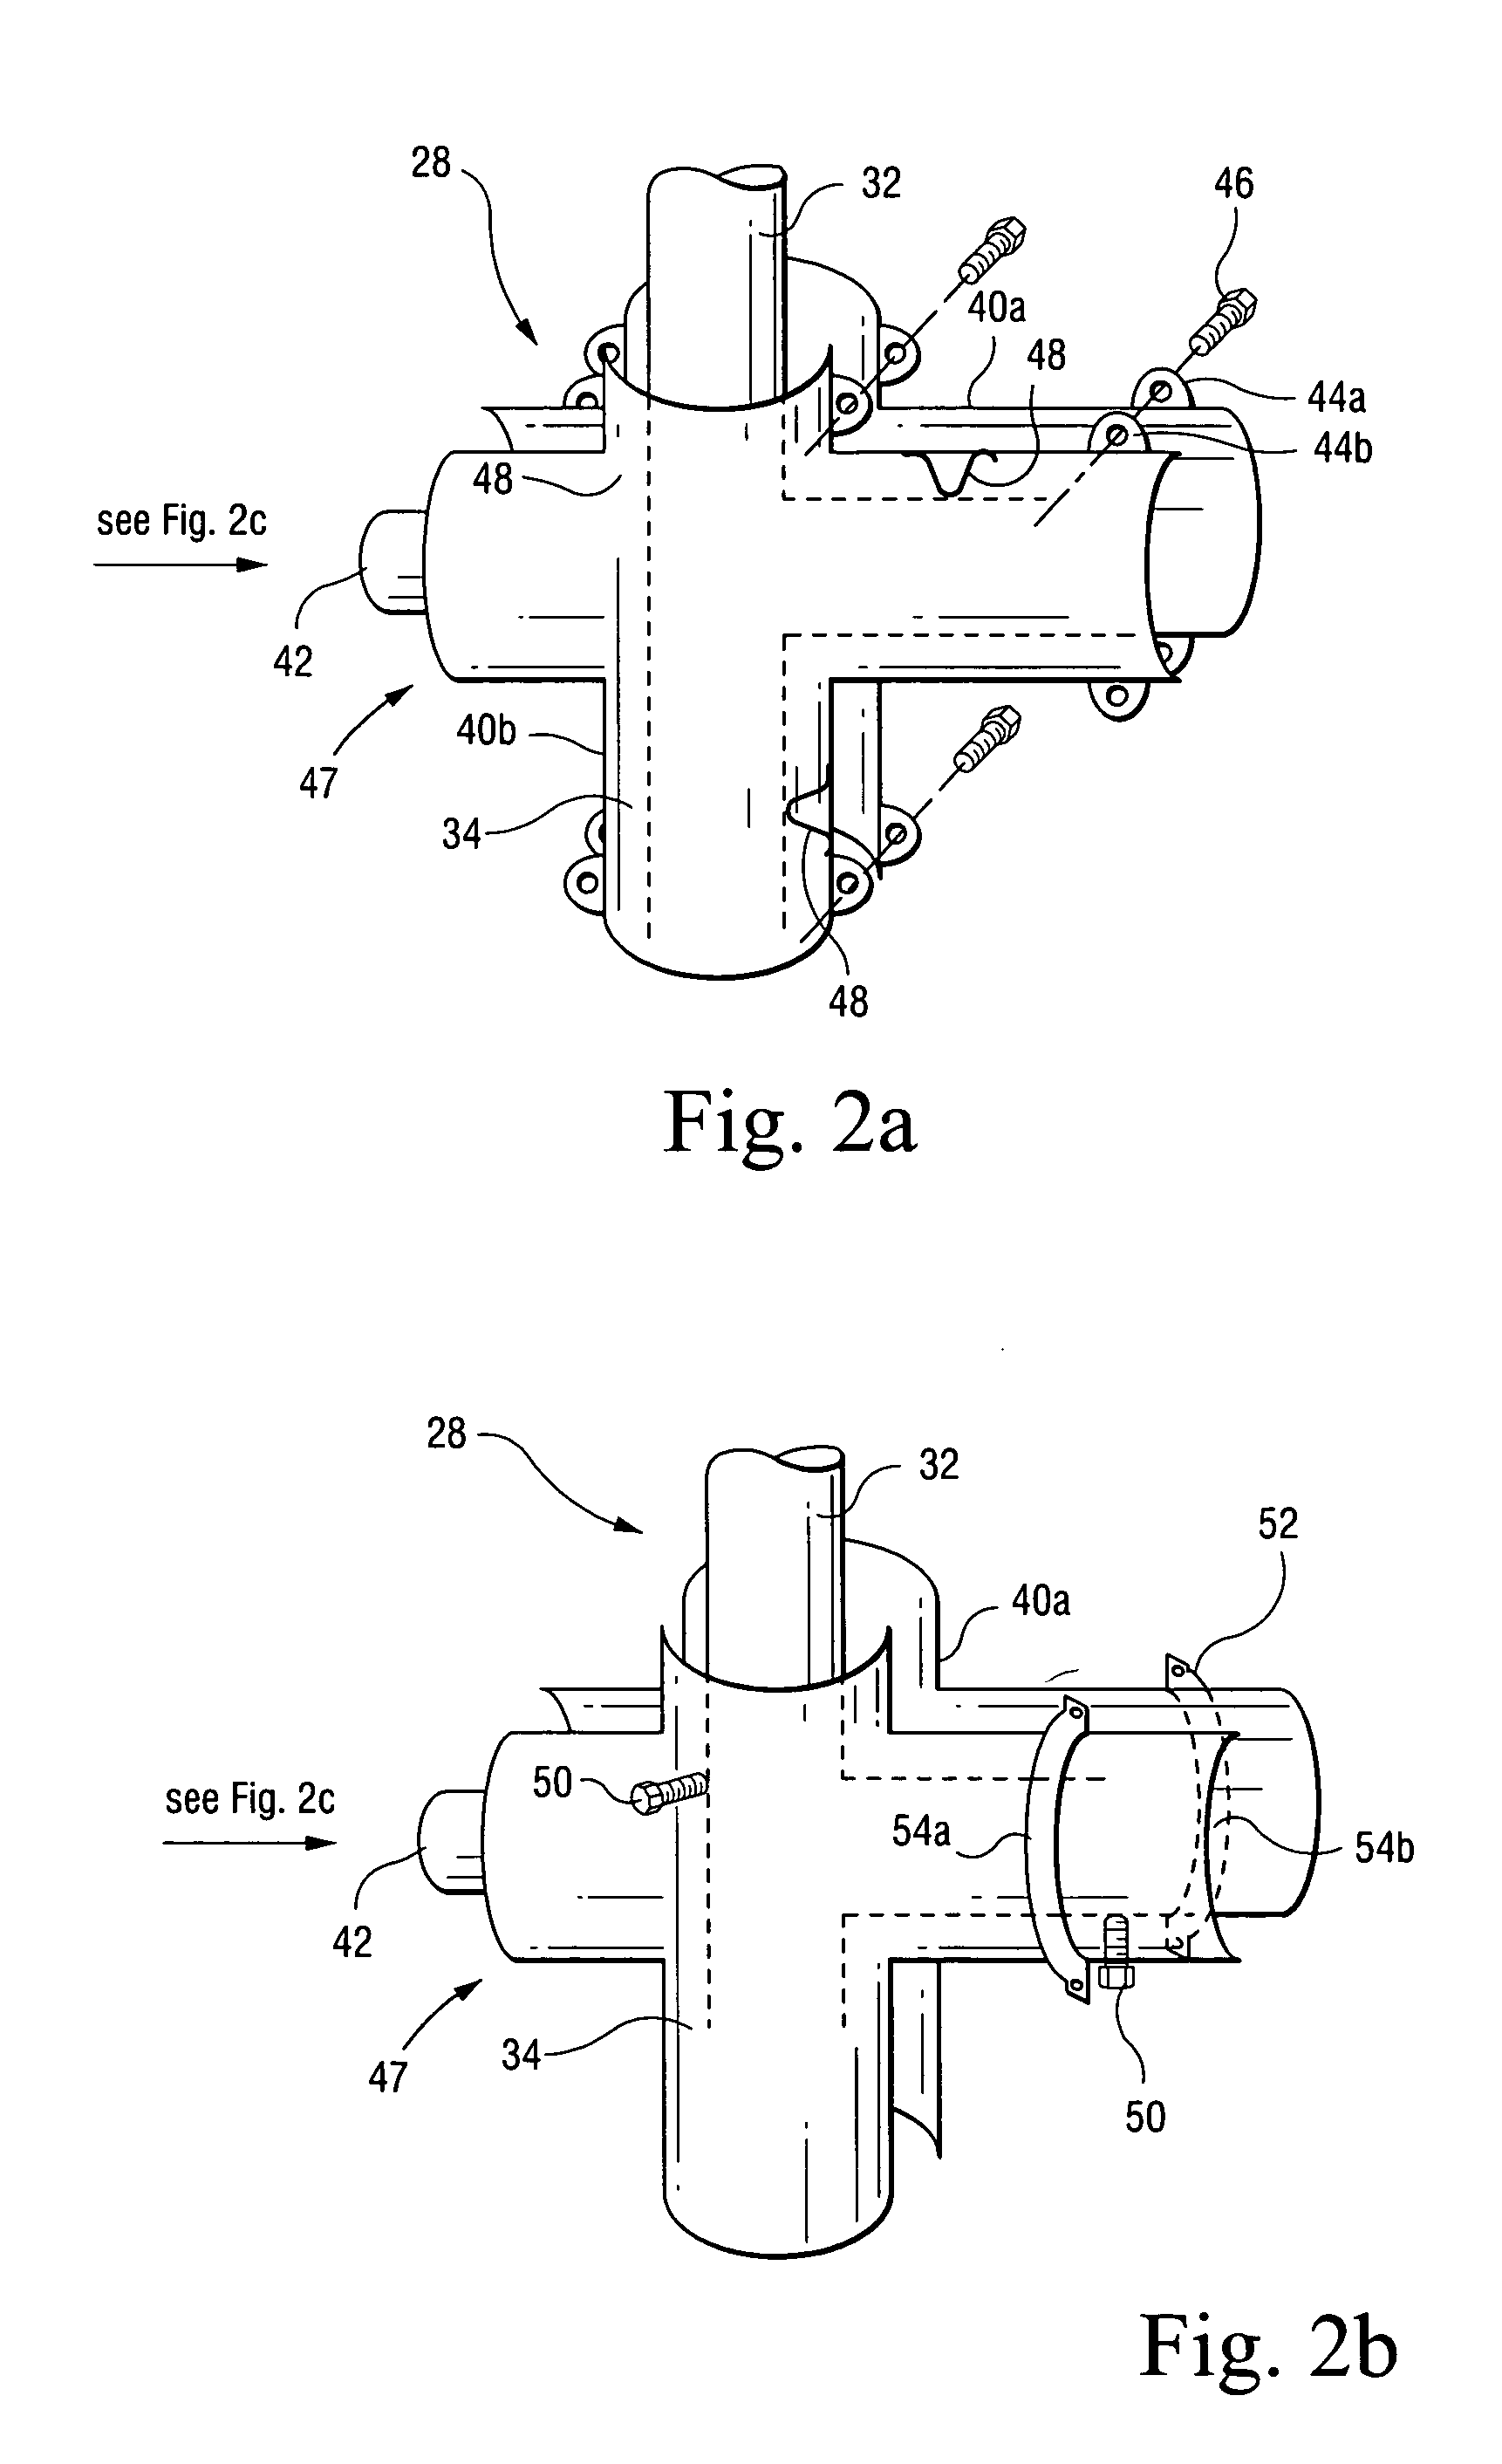 Cooling of liquid fuel components to eliminate coking